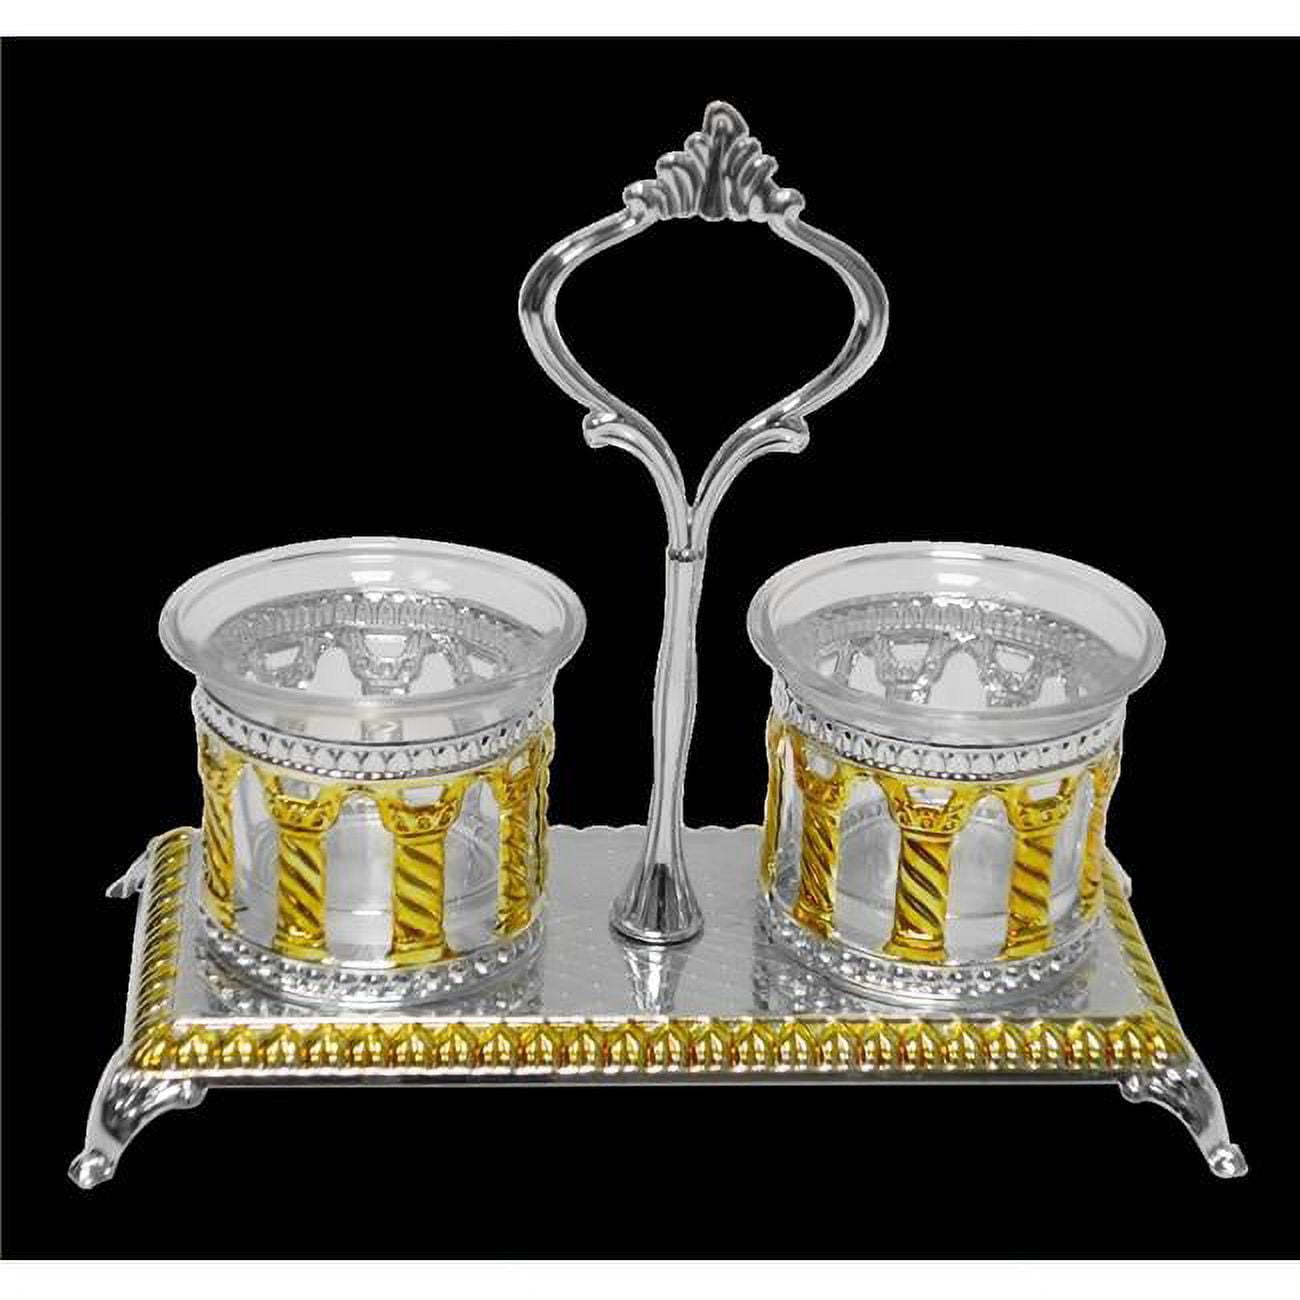 Picture of Nua 58426 Royal Palace Design Silver & Gold Plated Double Salt & Pepper Holder